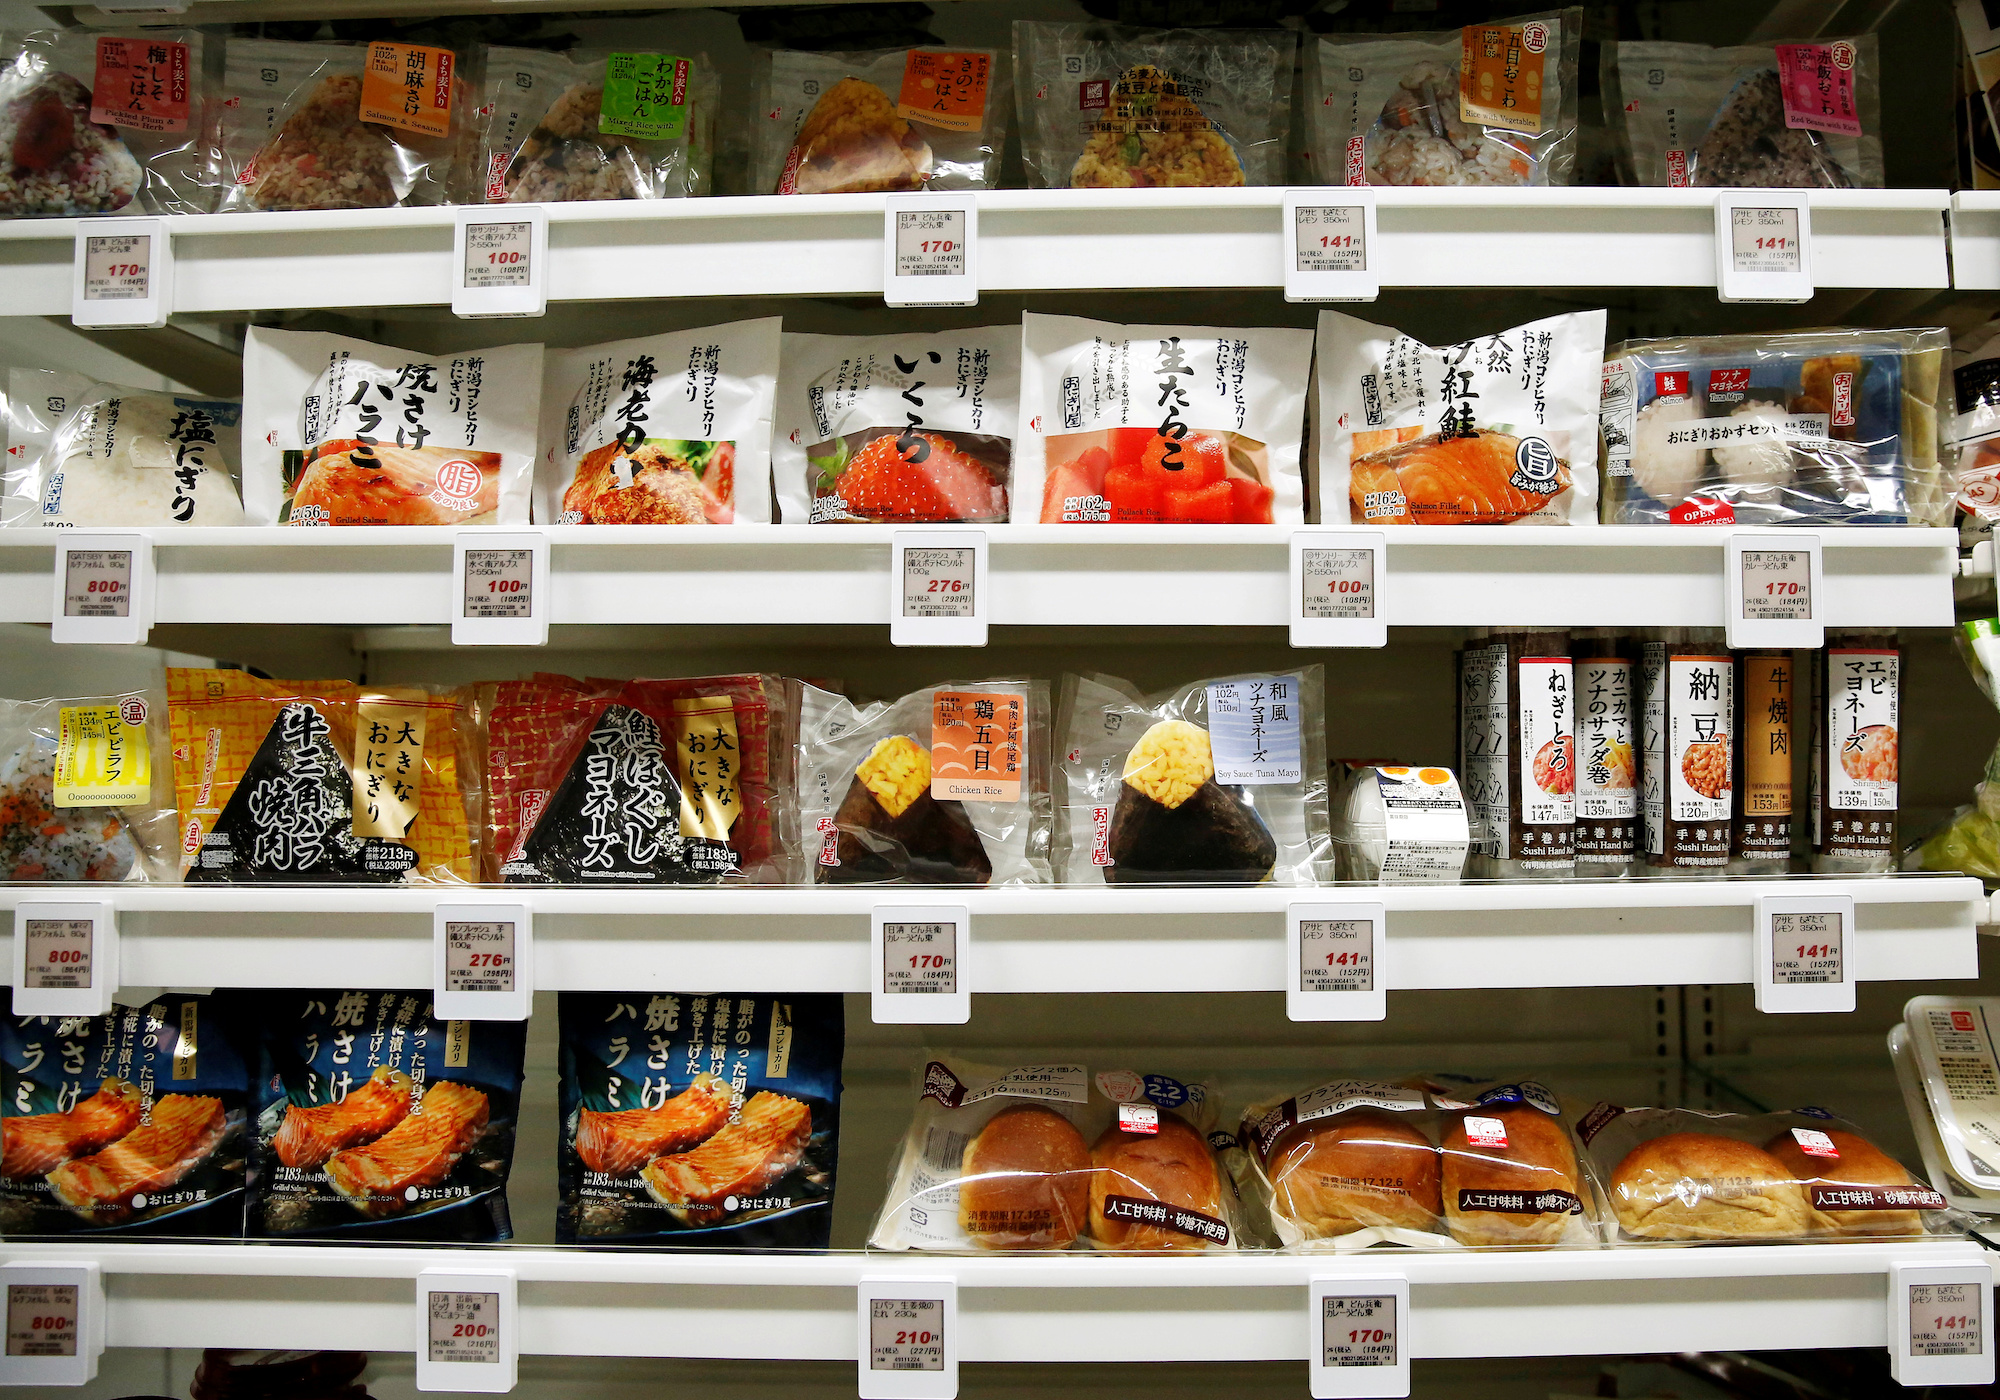 To fight food waste, Lawson employs AI technology to estimate what items may go unsold